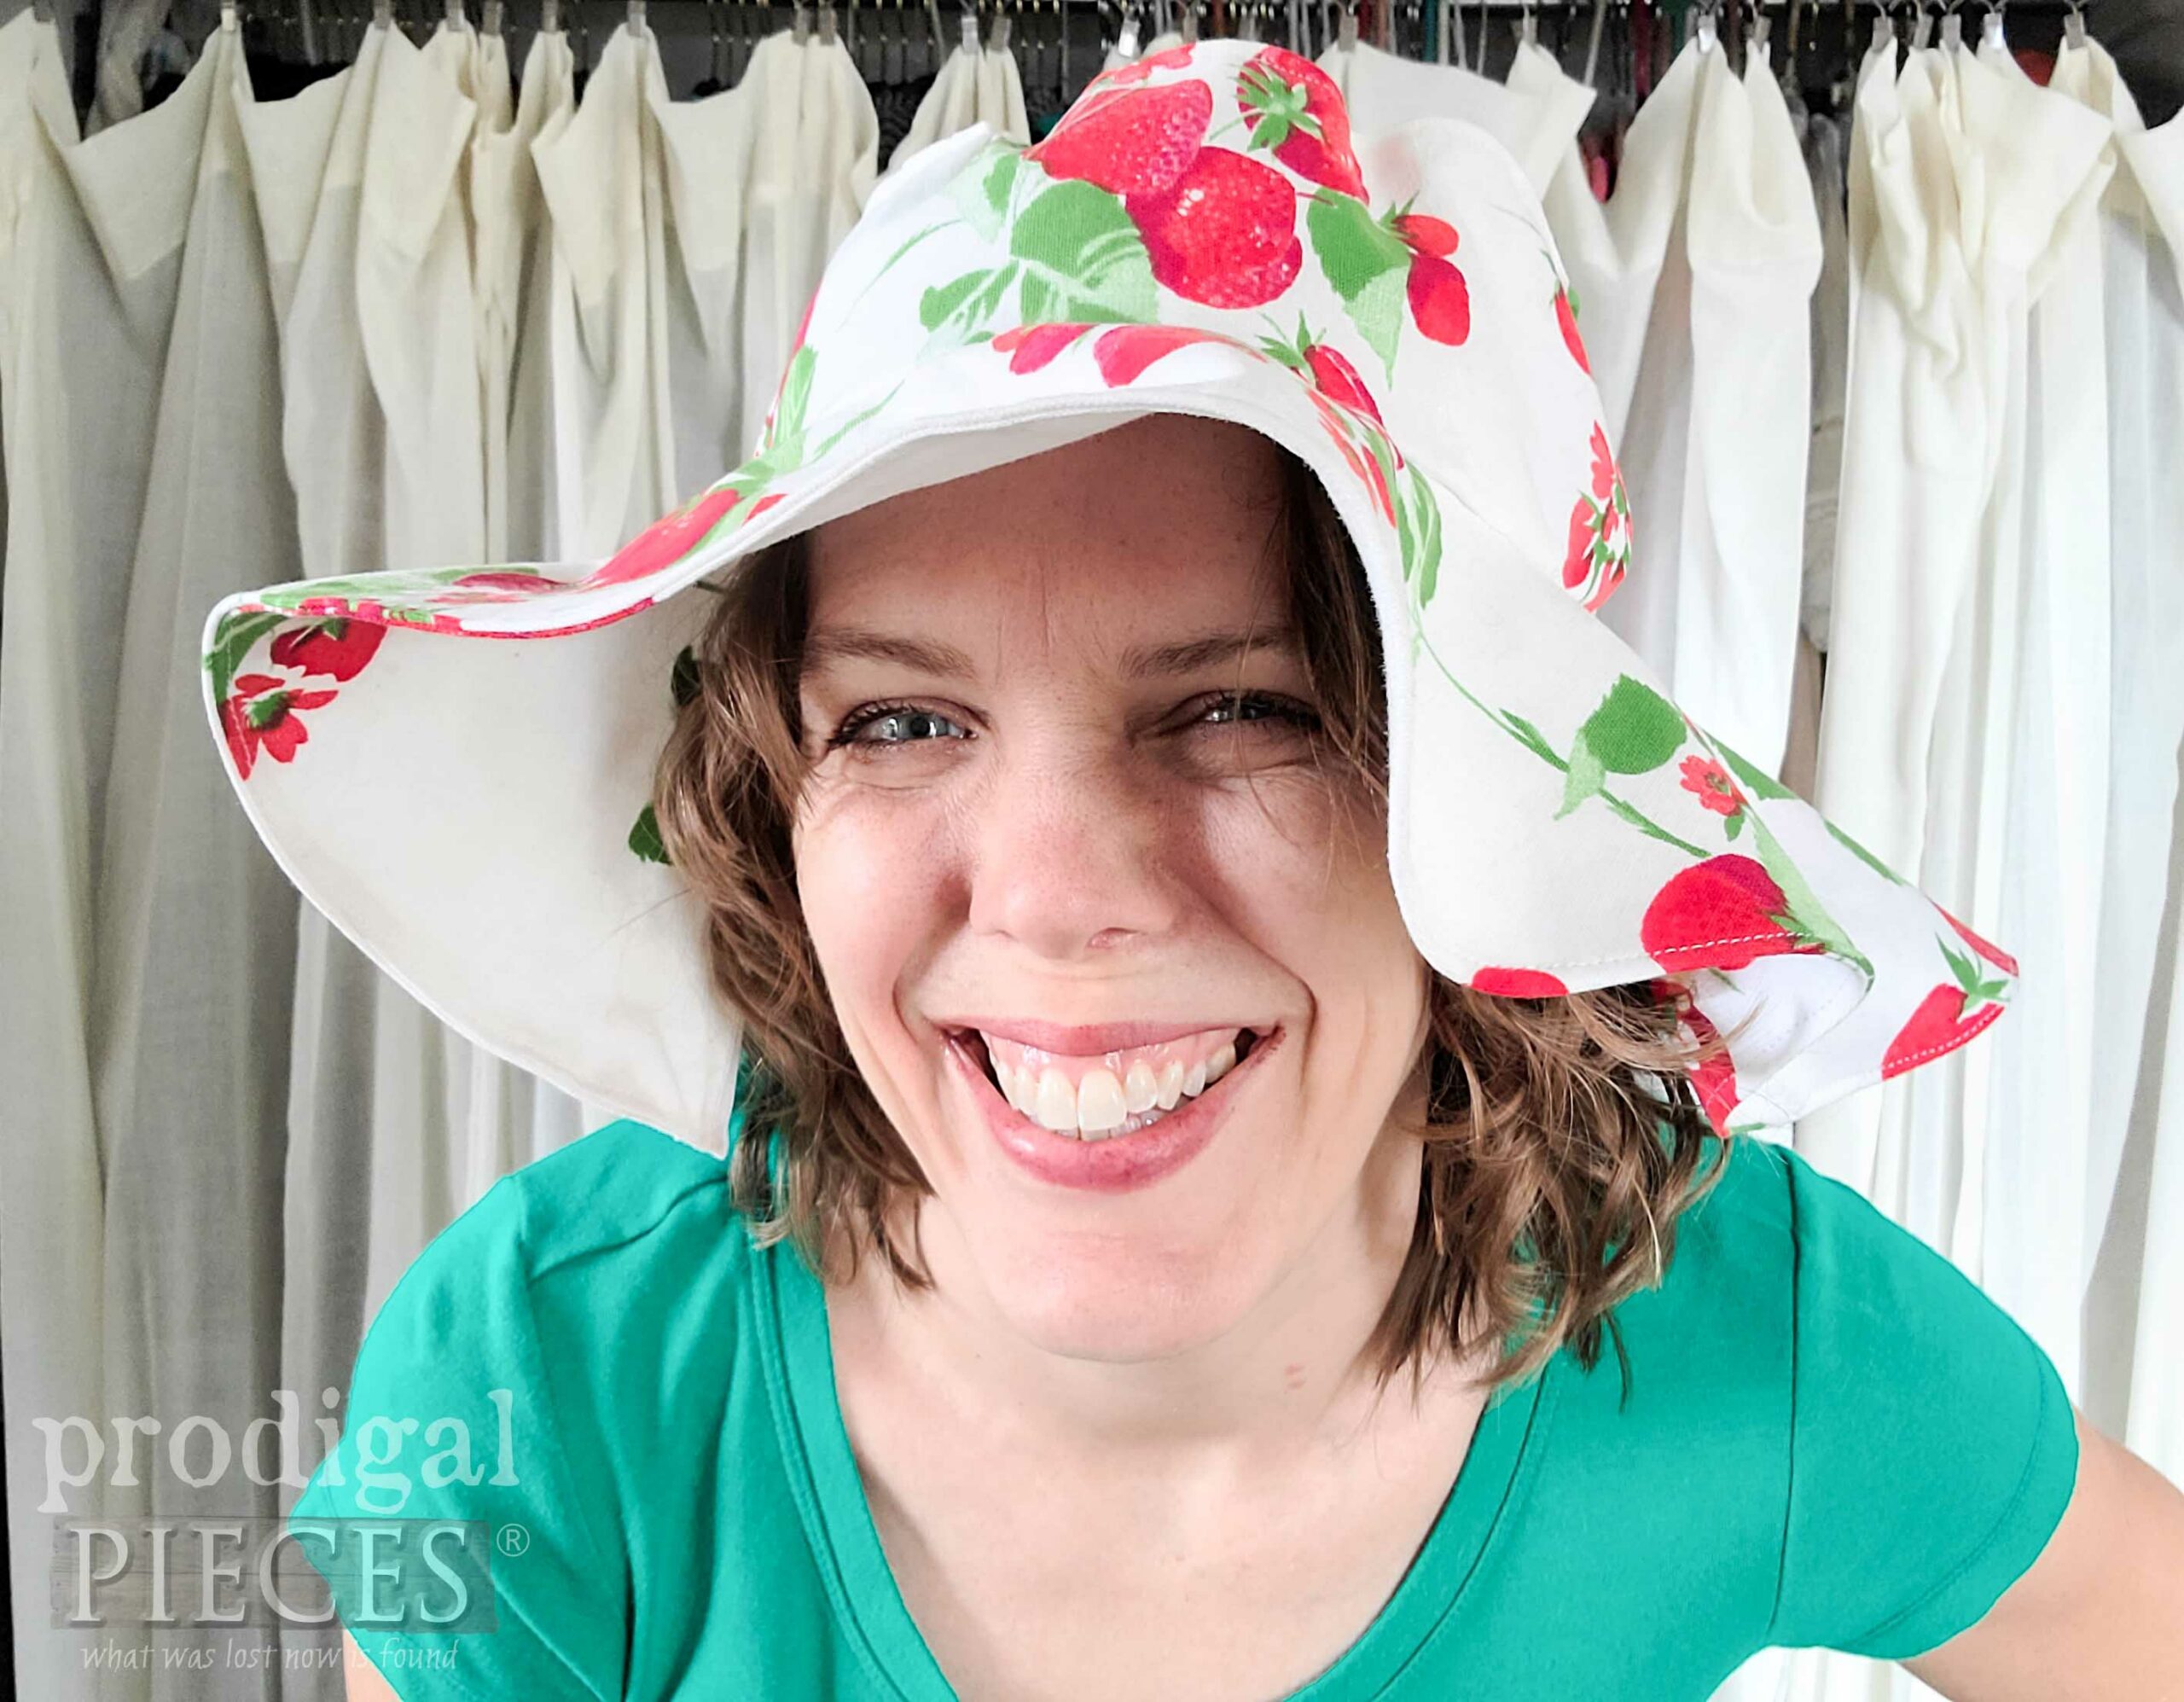 Silly Larissa of Prodigal Pieces in DIY Sun Hat by Larissa of Prodigal Pieces | prodigalpieces.com #prodigalpieces #sewing #diy #fashion